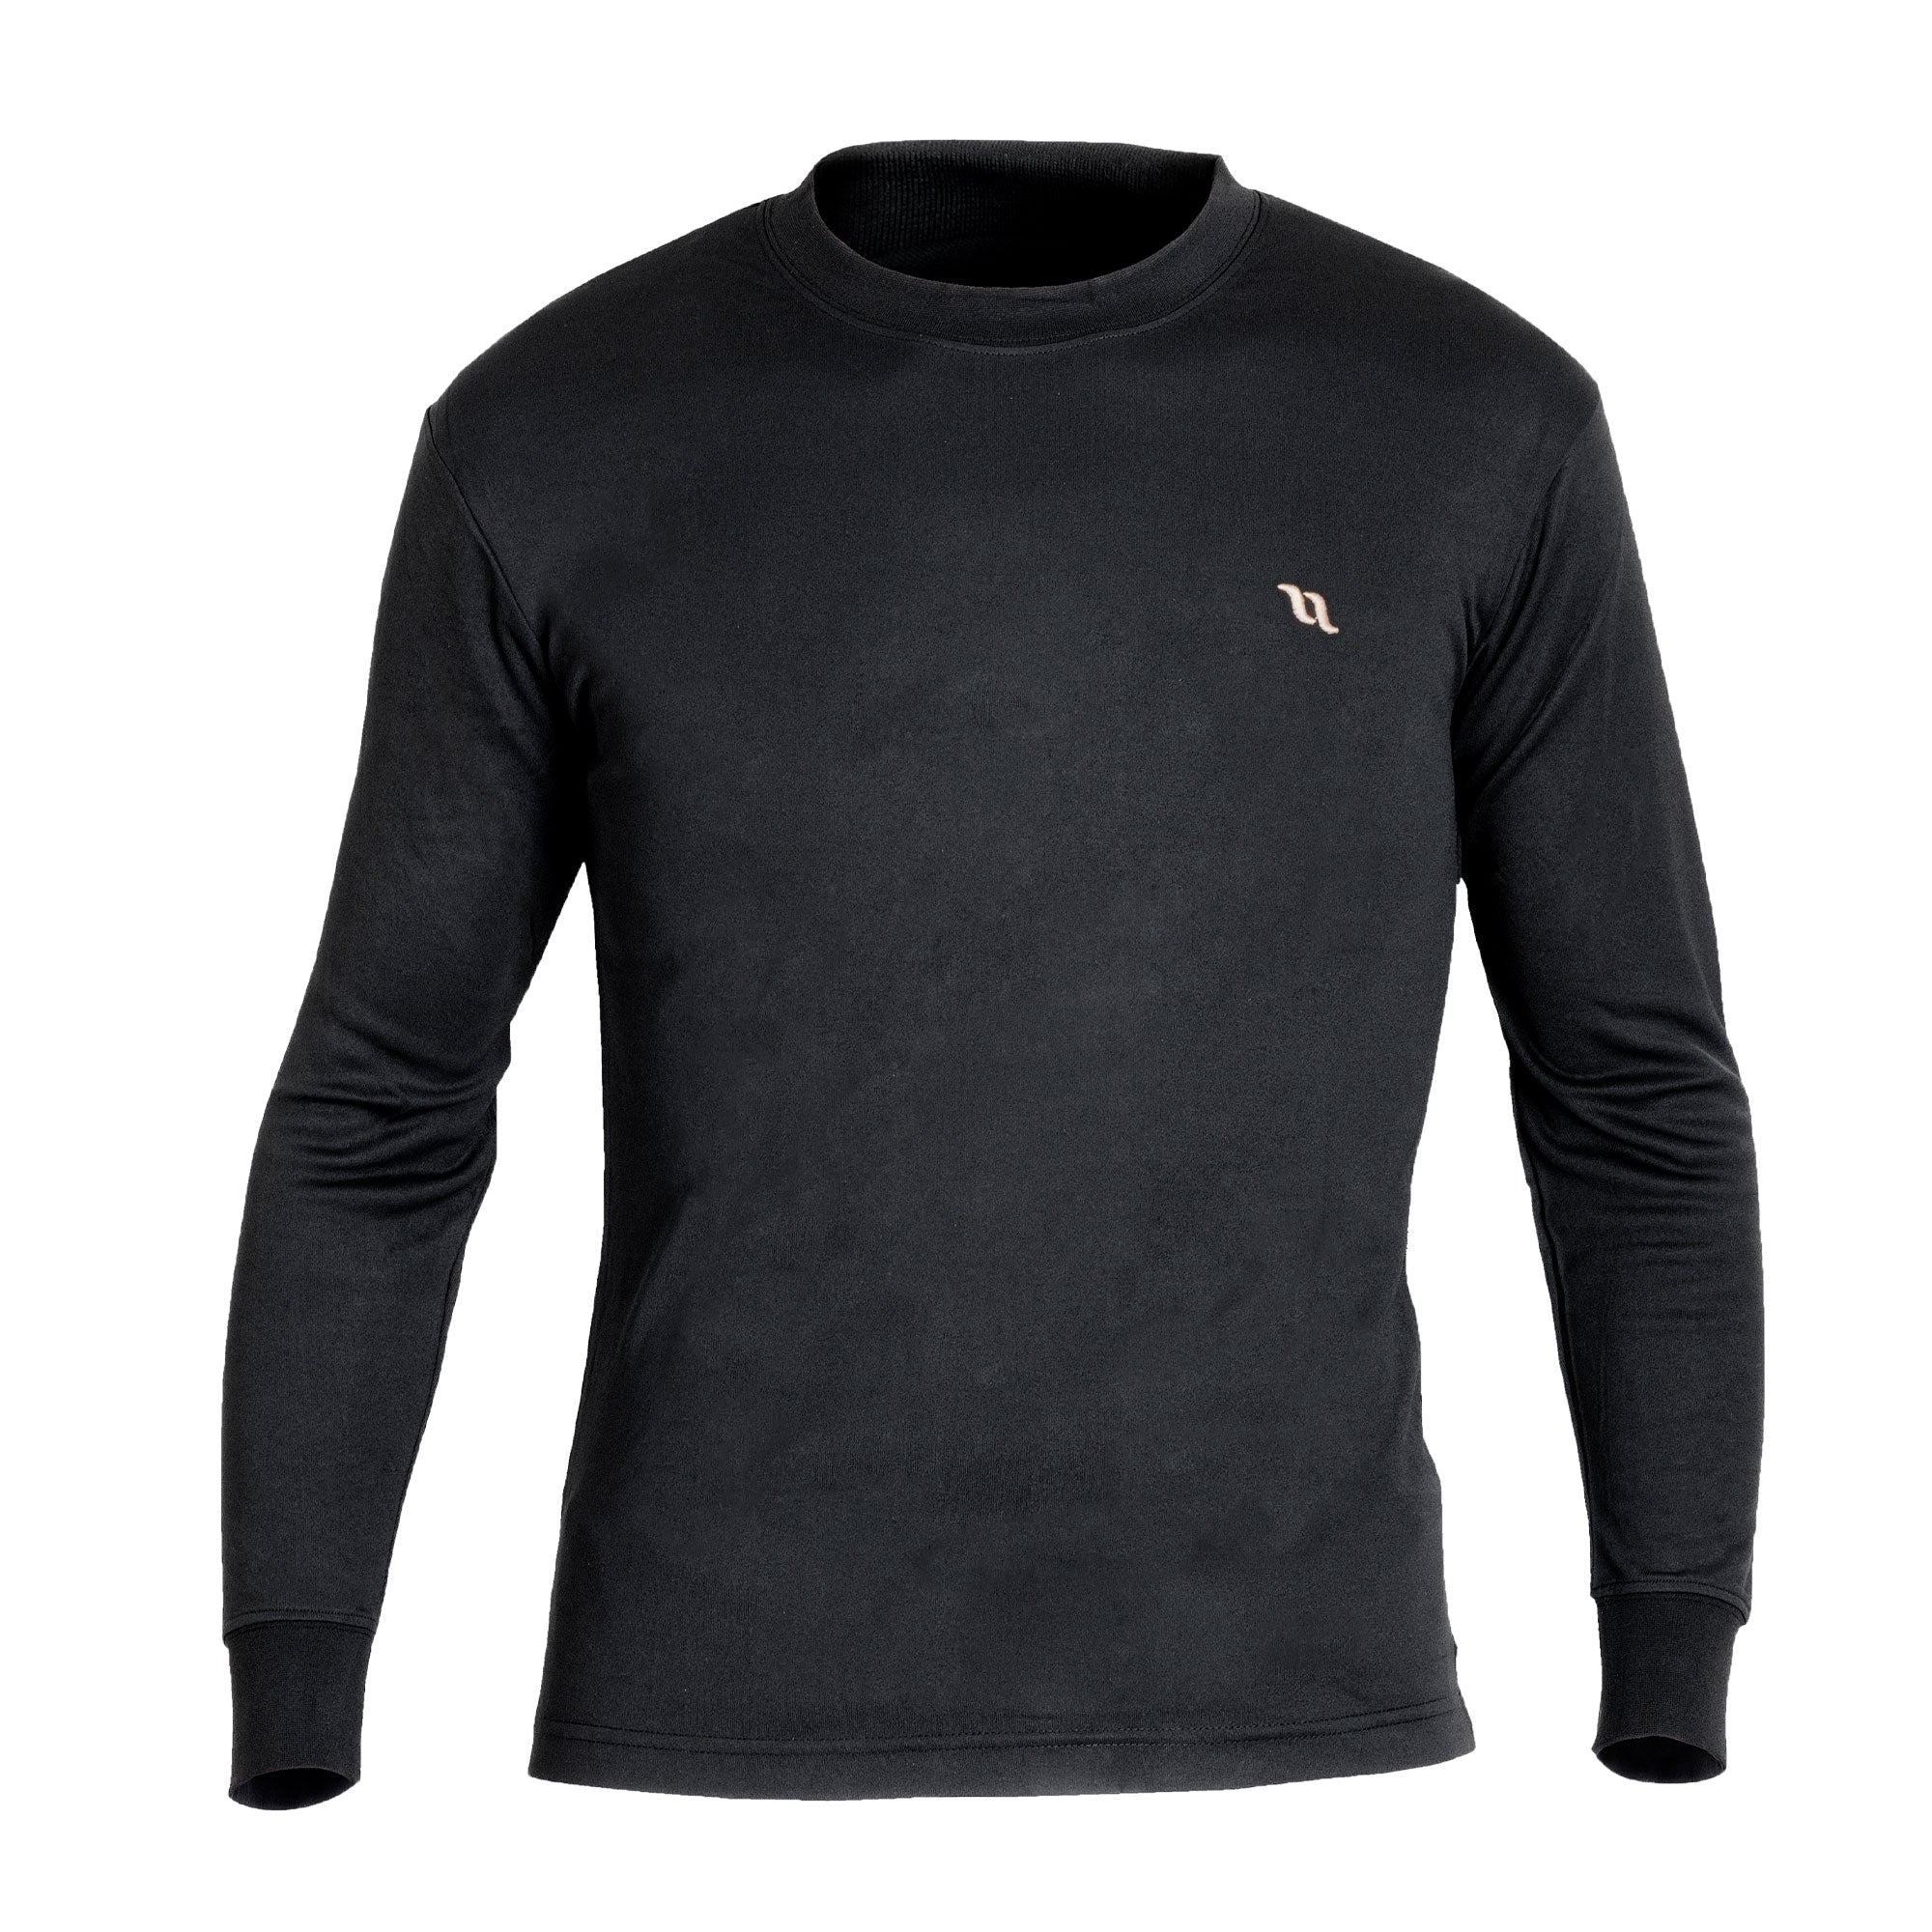 Therapeutic Long-Sleeved Shirt for Men and Women